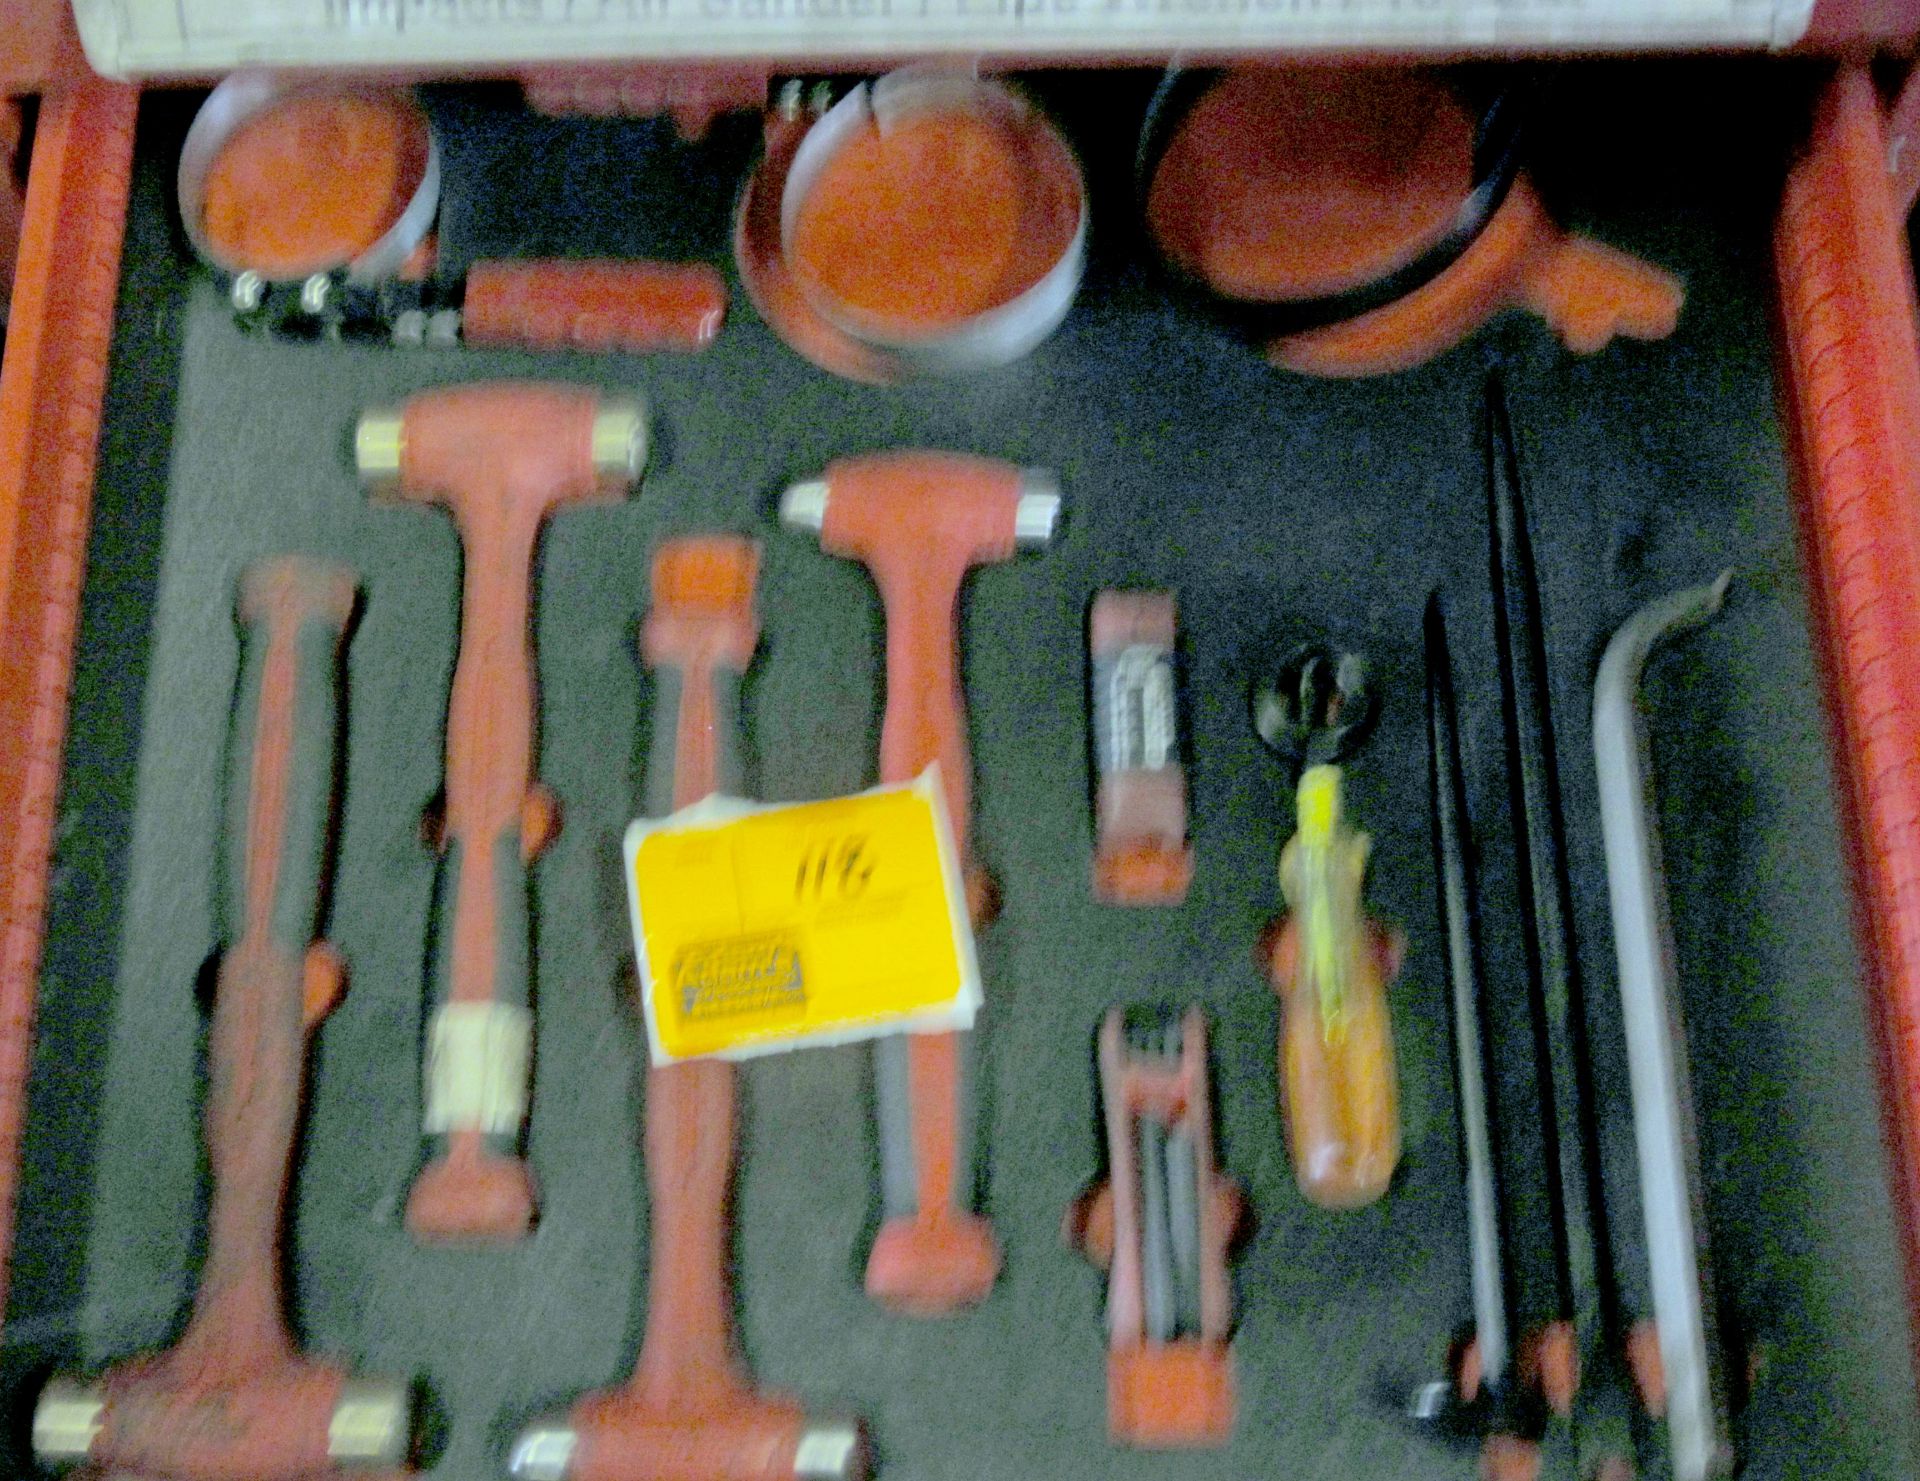 STANLEY VIDMAR SEVEN DRAWER TOOL BOX W/ SNAPON AND PROTO TOOLS - Image 3 of 8